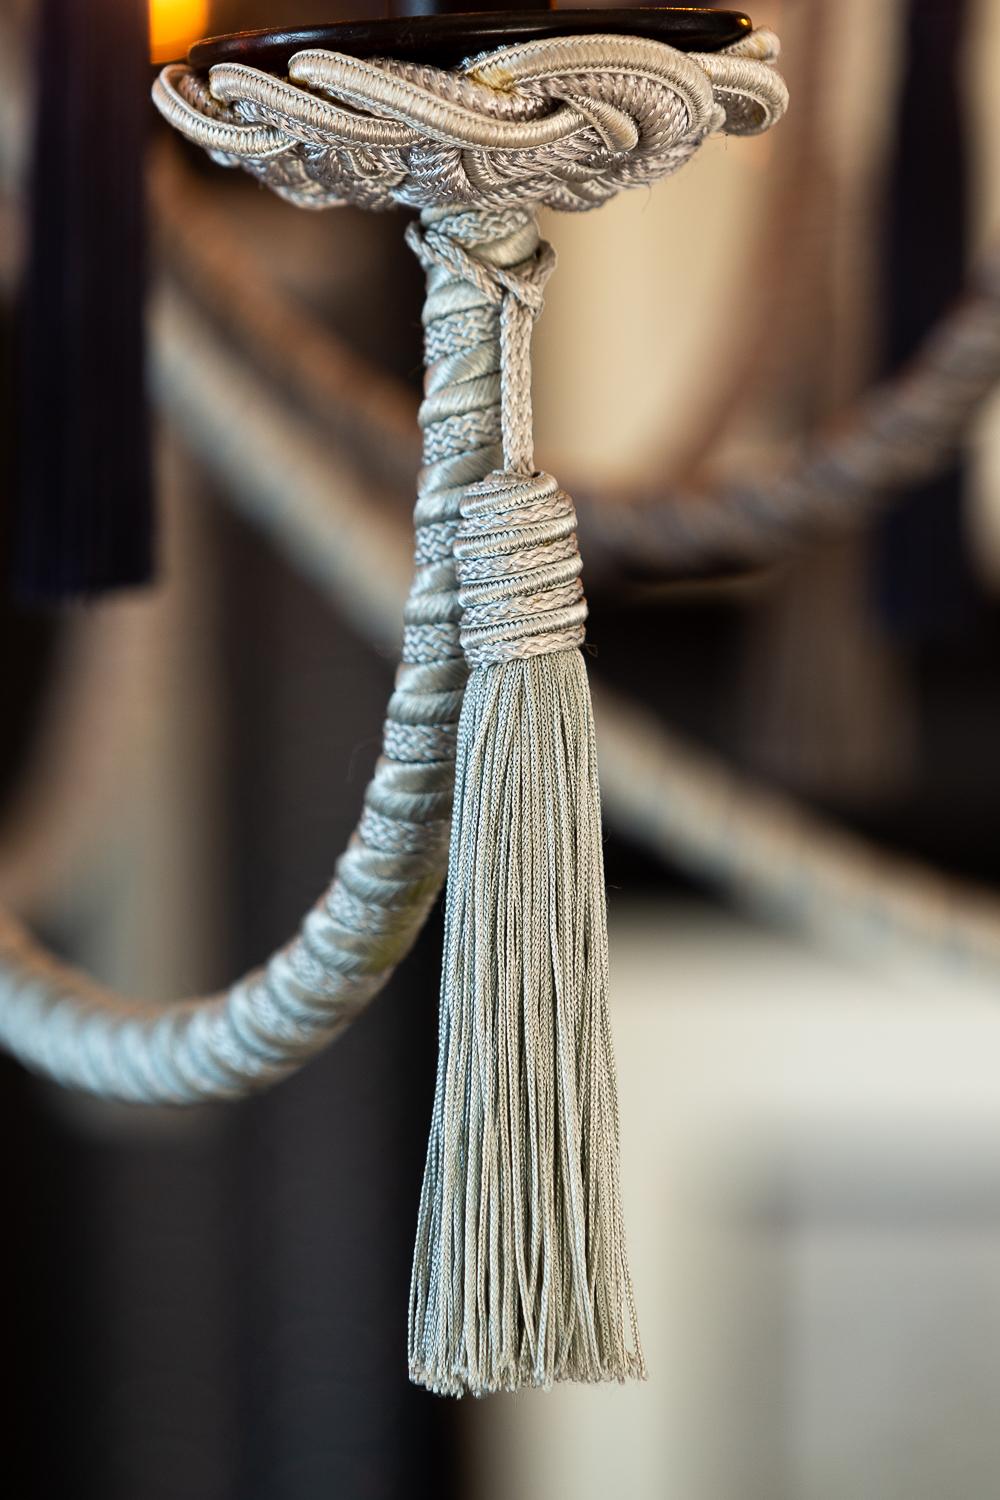 Wrought iron structure is wrapped with jute and silk cording. From an elaborate cap, fifteen arms descend at three staggered heights and depths, alternating in colors. Cording under the bobèche is shaped in traditional passementerie knotted detail.